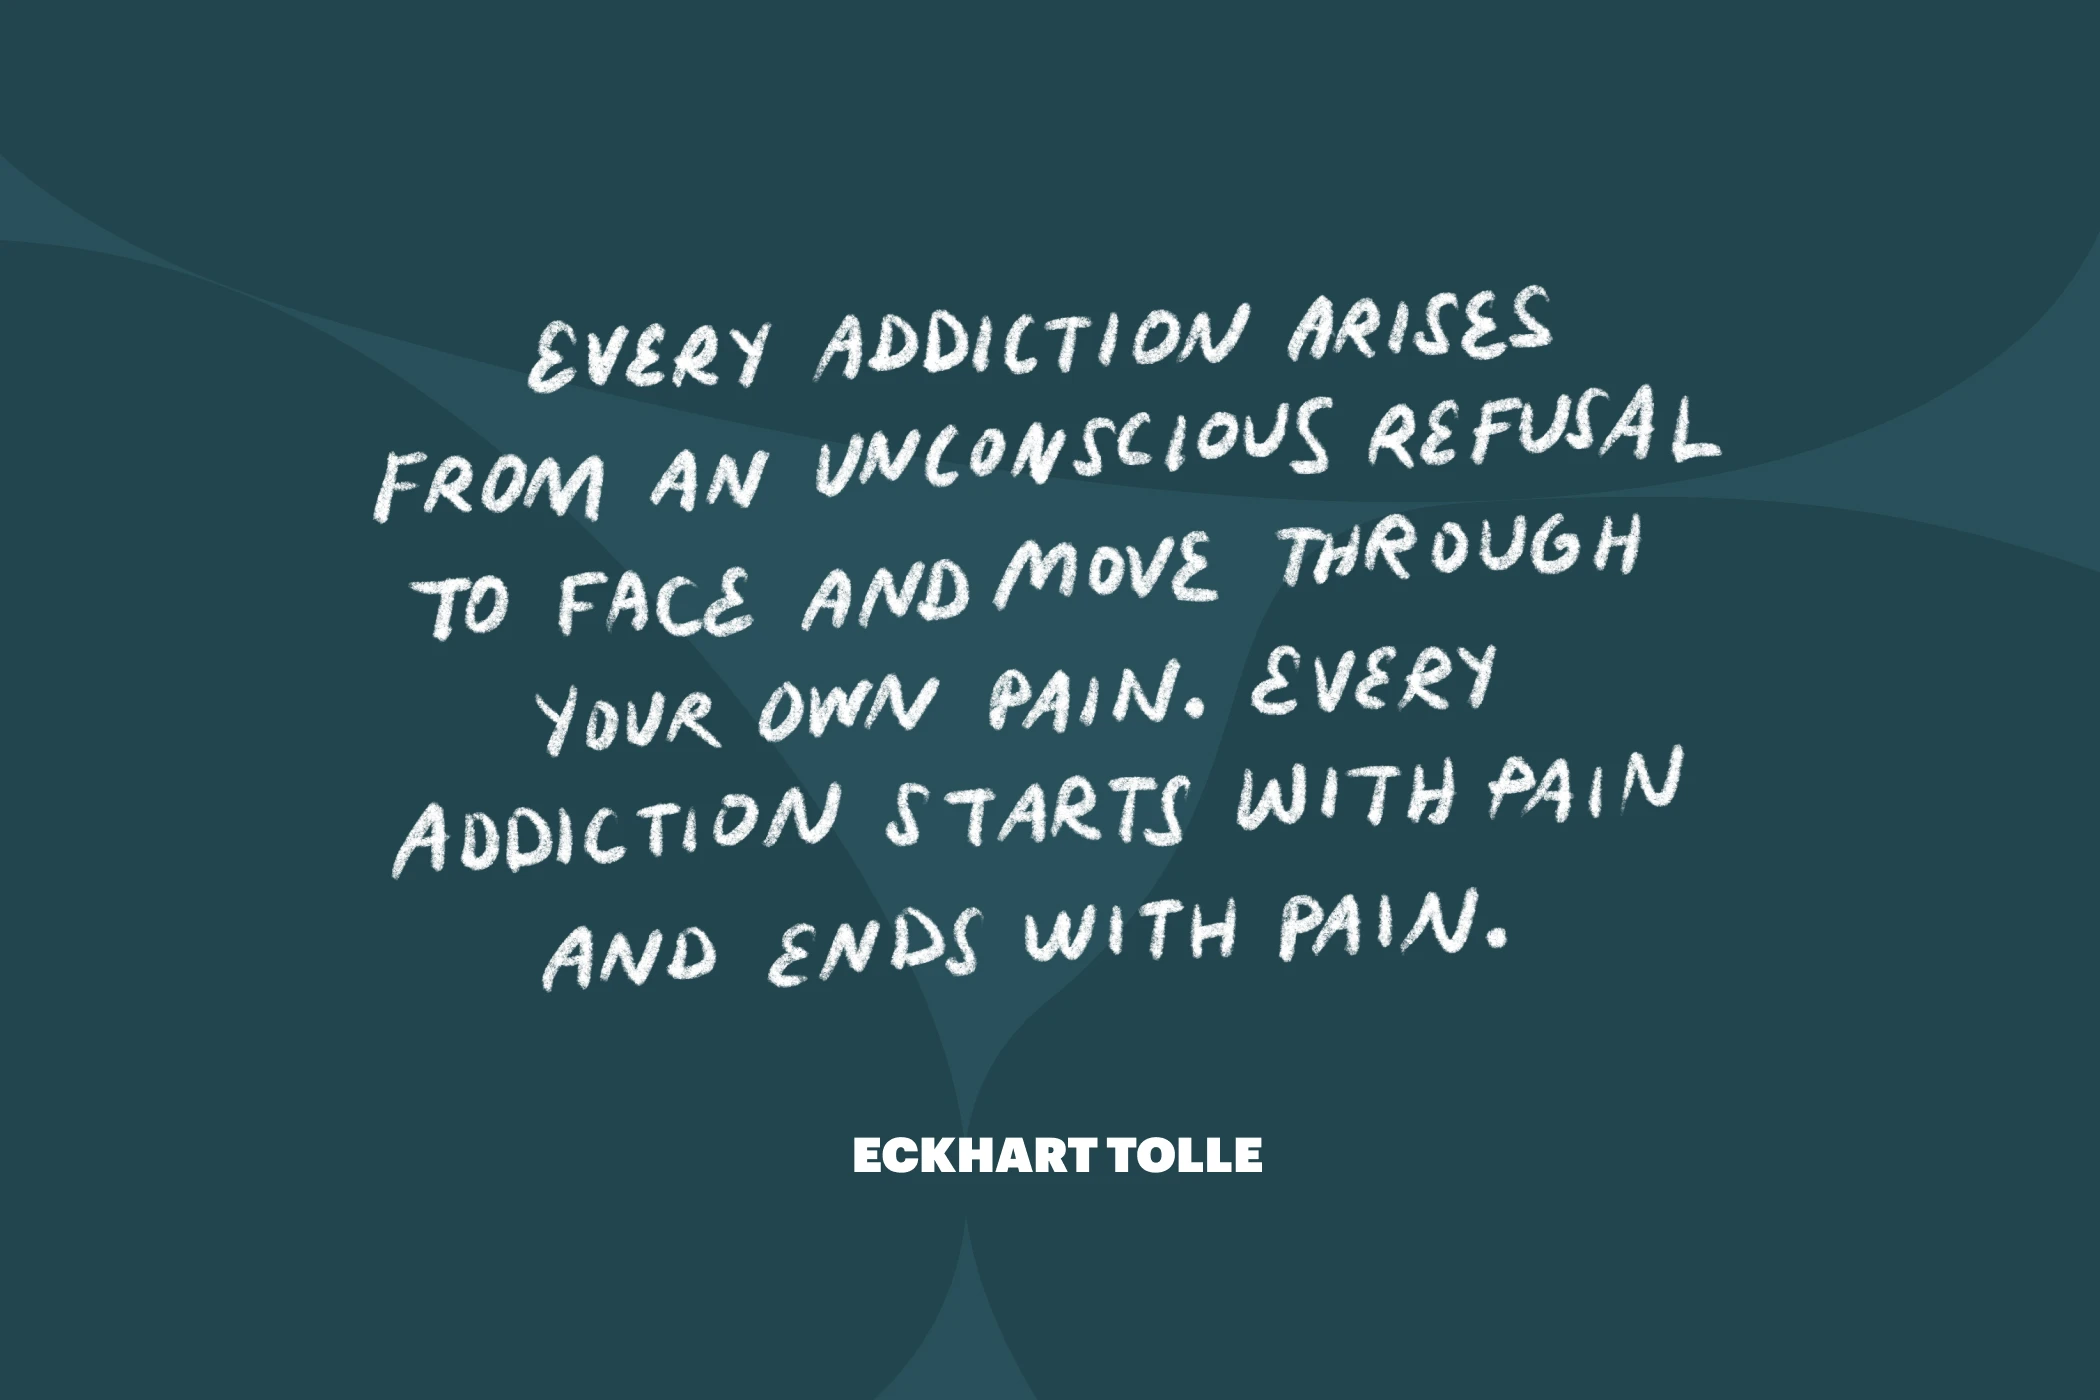 Quote by Eckhart Tolle